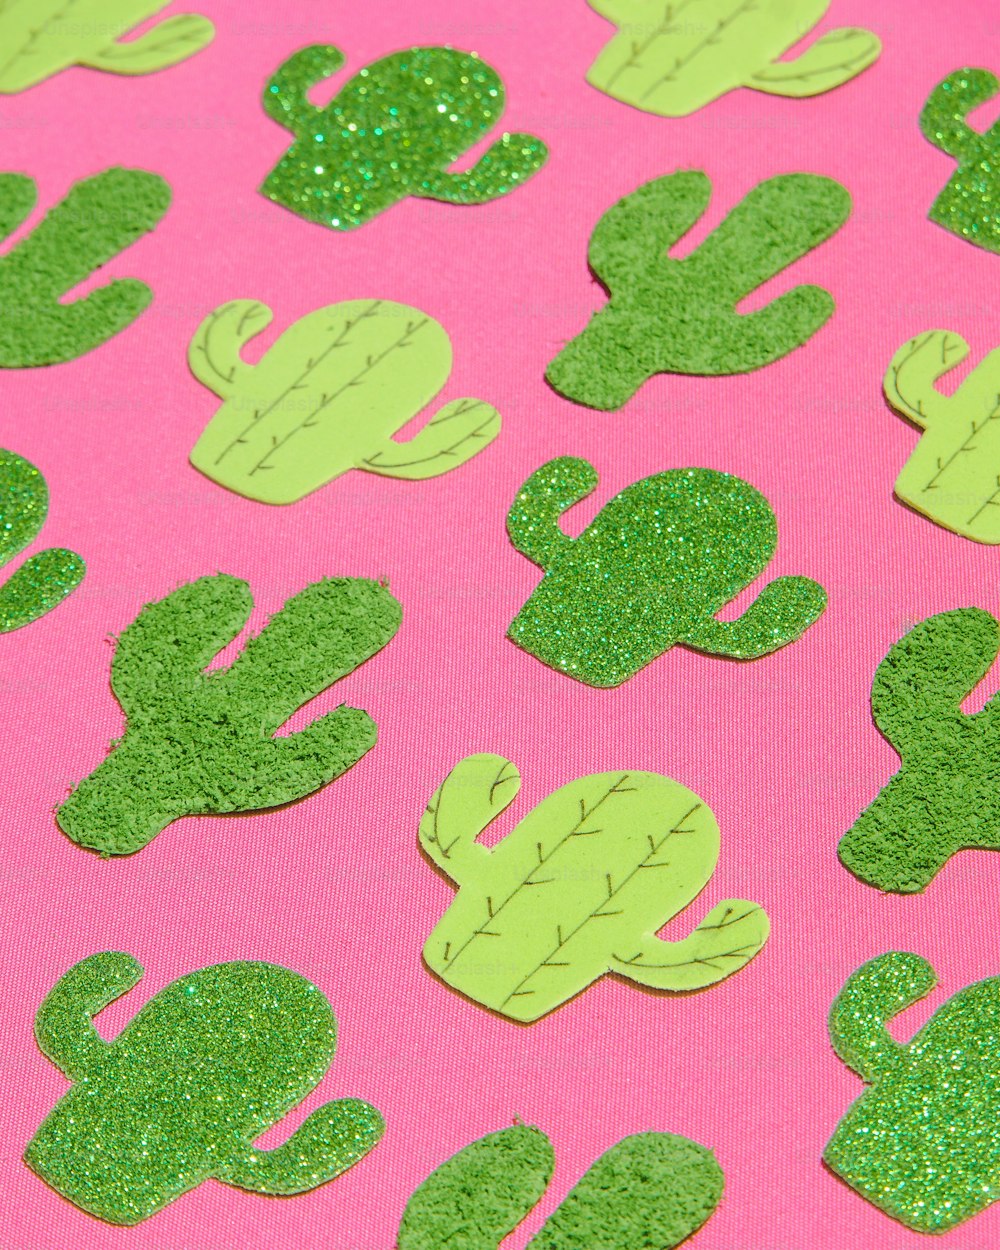 a pink background with green glittered cactus shapes